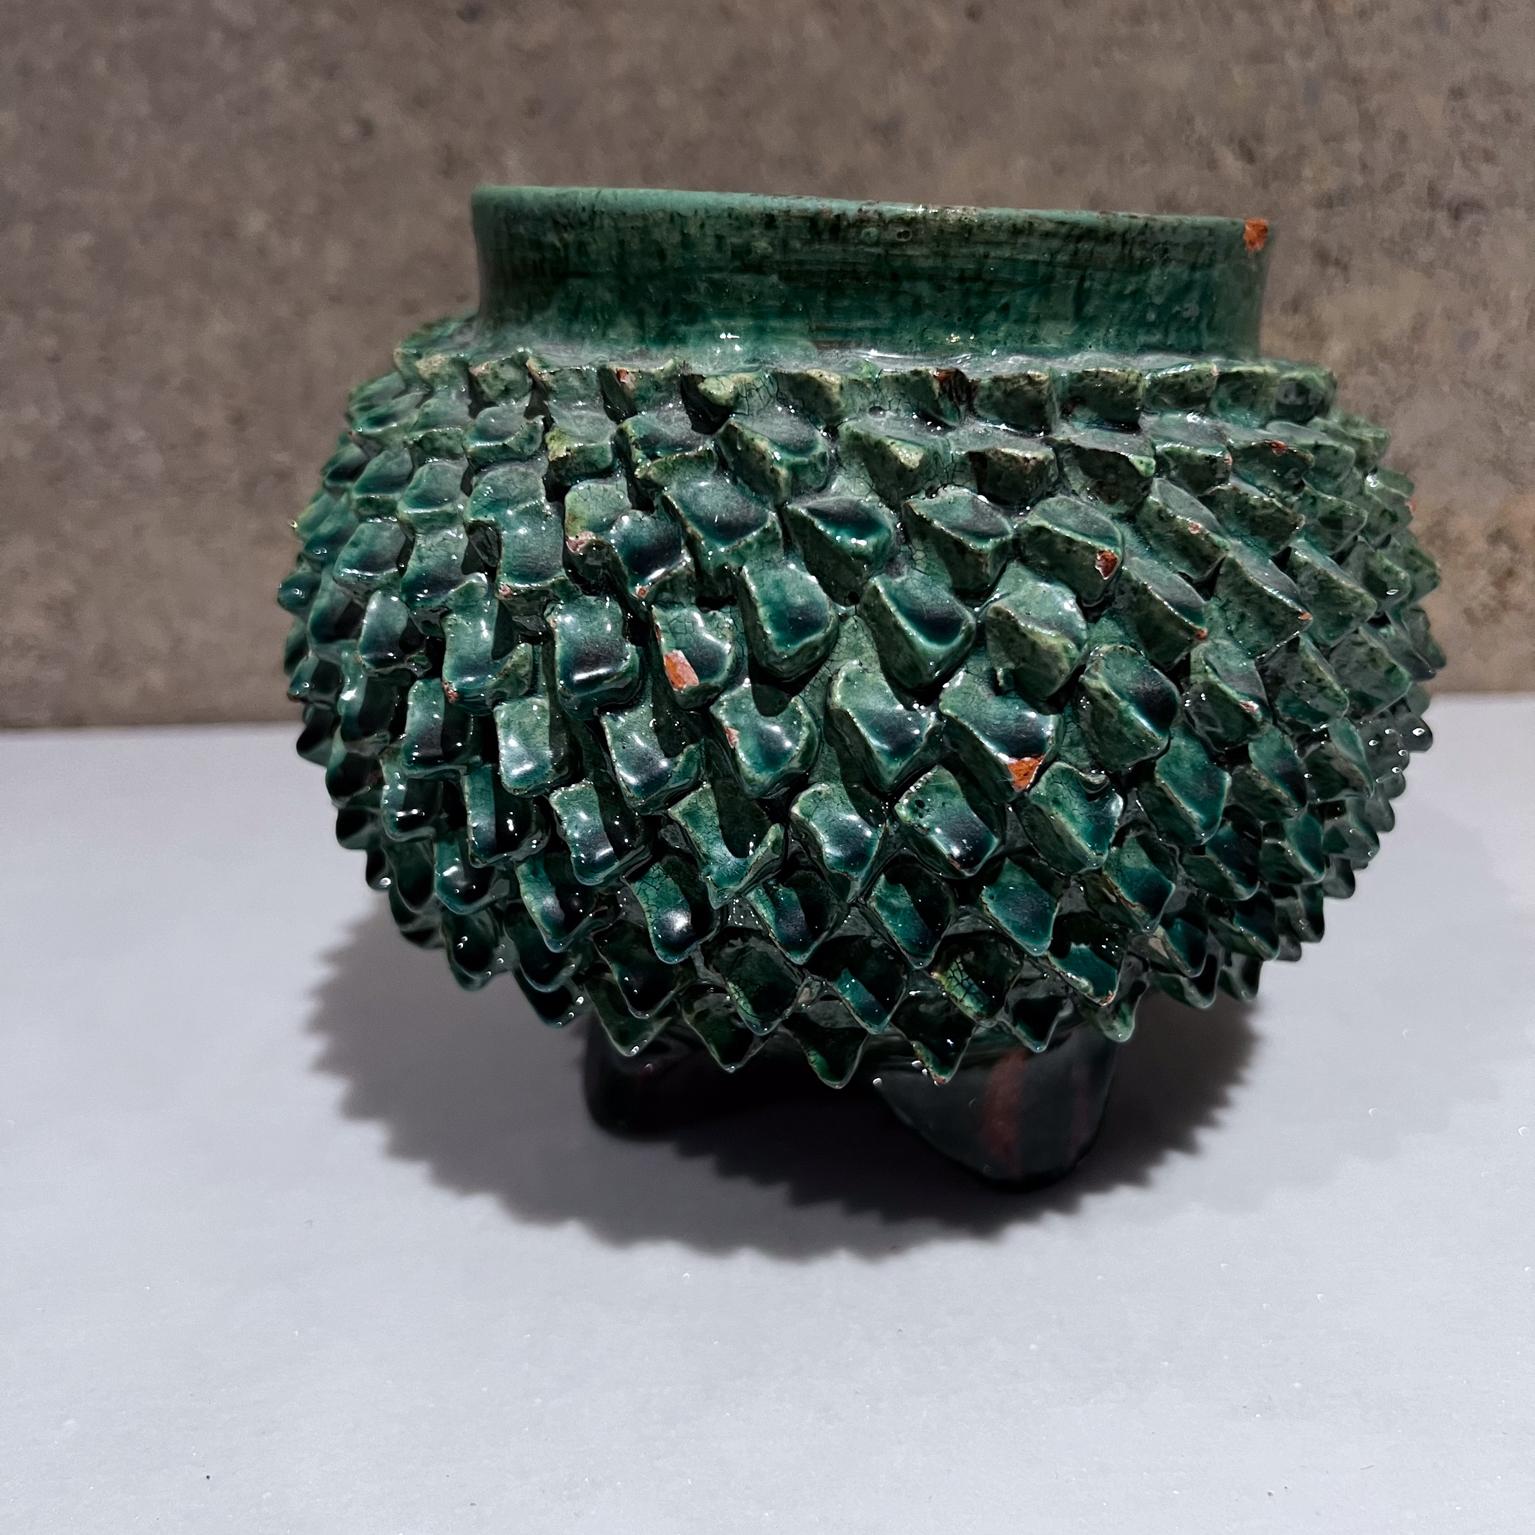 AMBIANIC presents
1970s Art Pottery Green Pineapple Decorative Bowl 
Piña Ceramics Michoacán Mexico
5.25 h x 6.5 diameter
Original unrestored vintage condition
See all images shown.